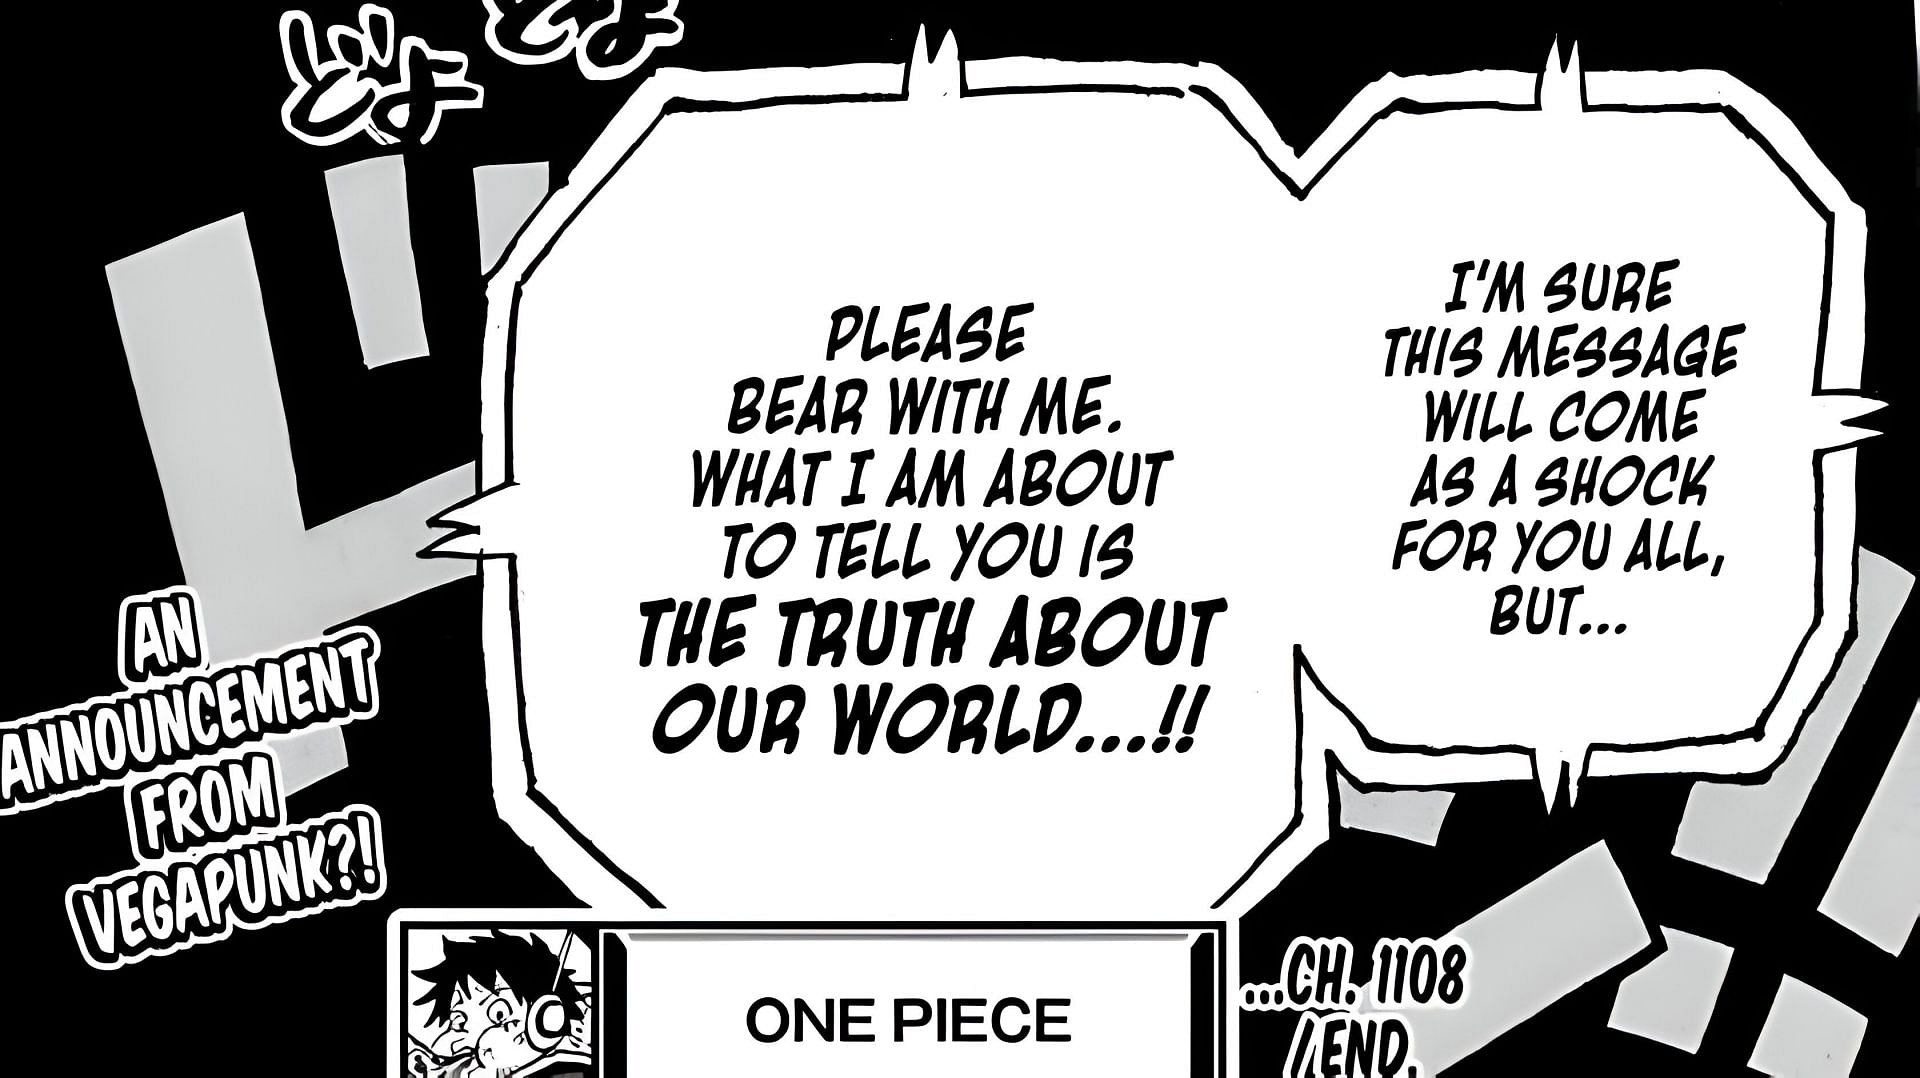 Vegapunk is about to reveal the truth of the world (Image via Shueisha)